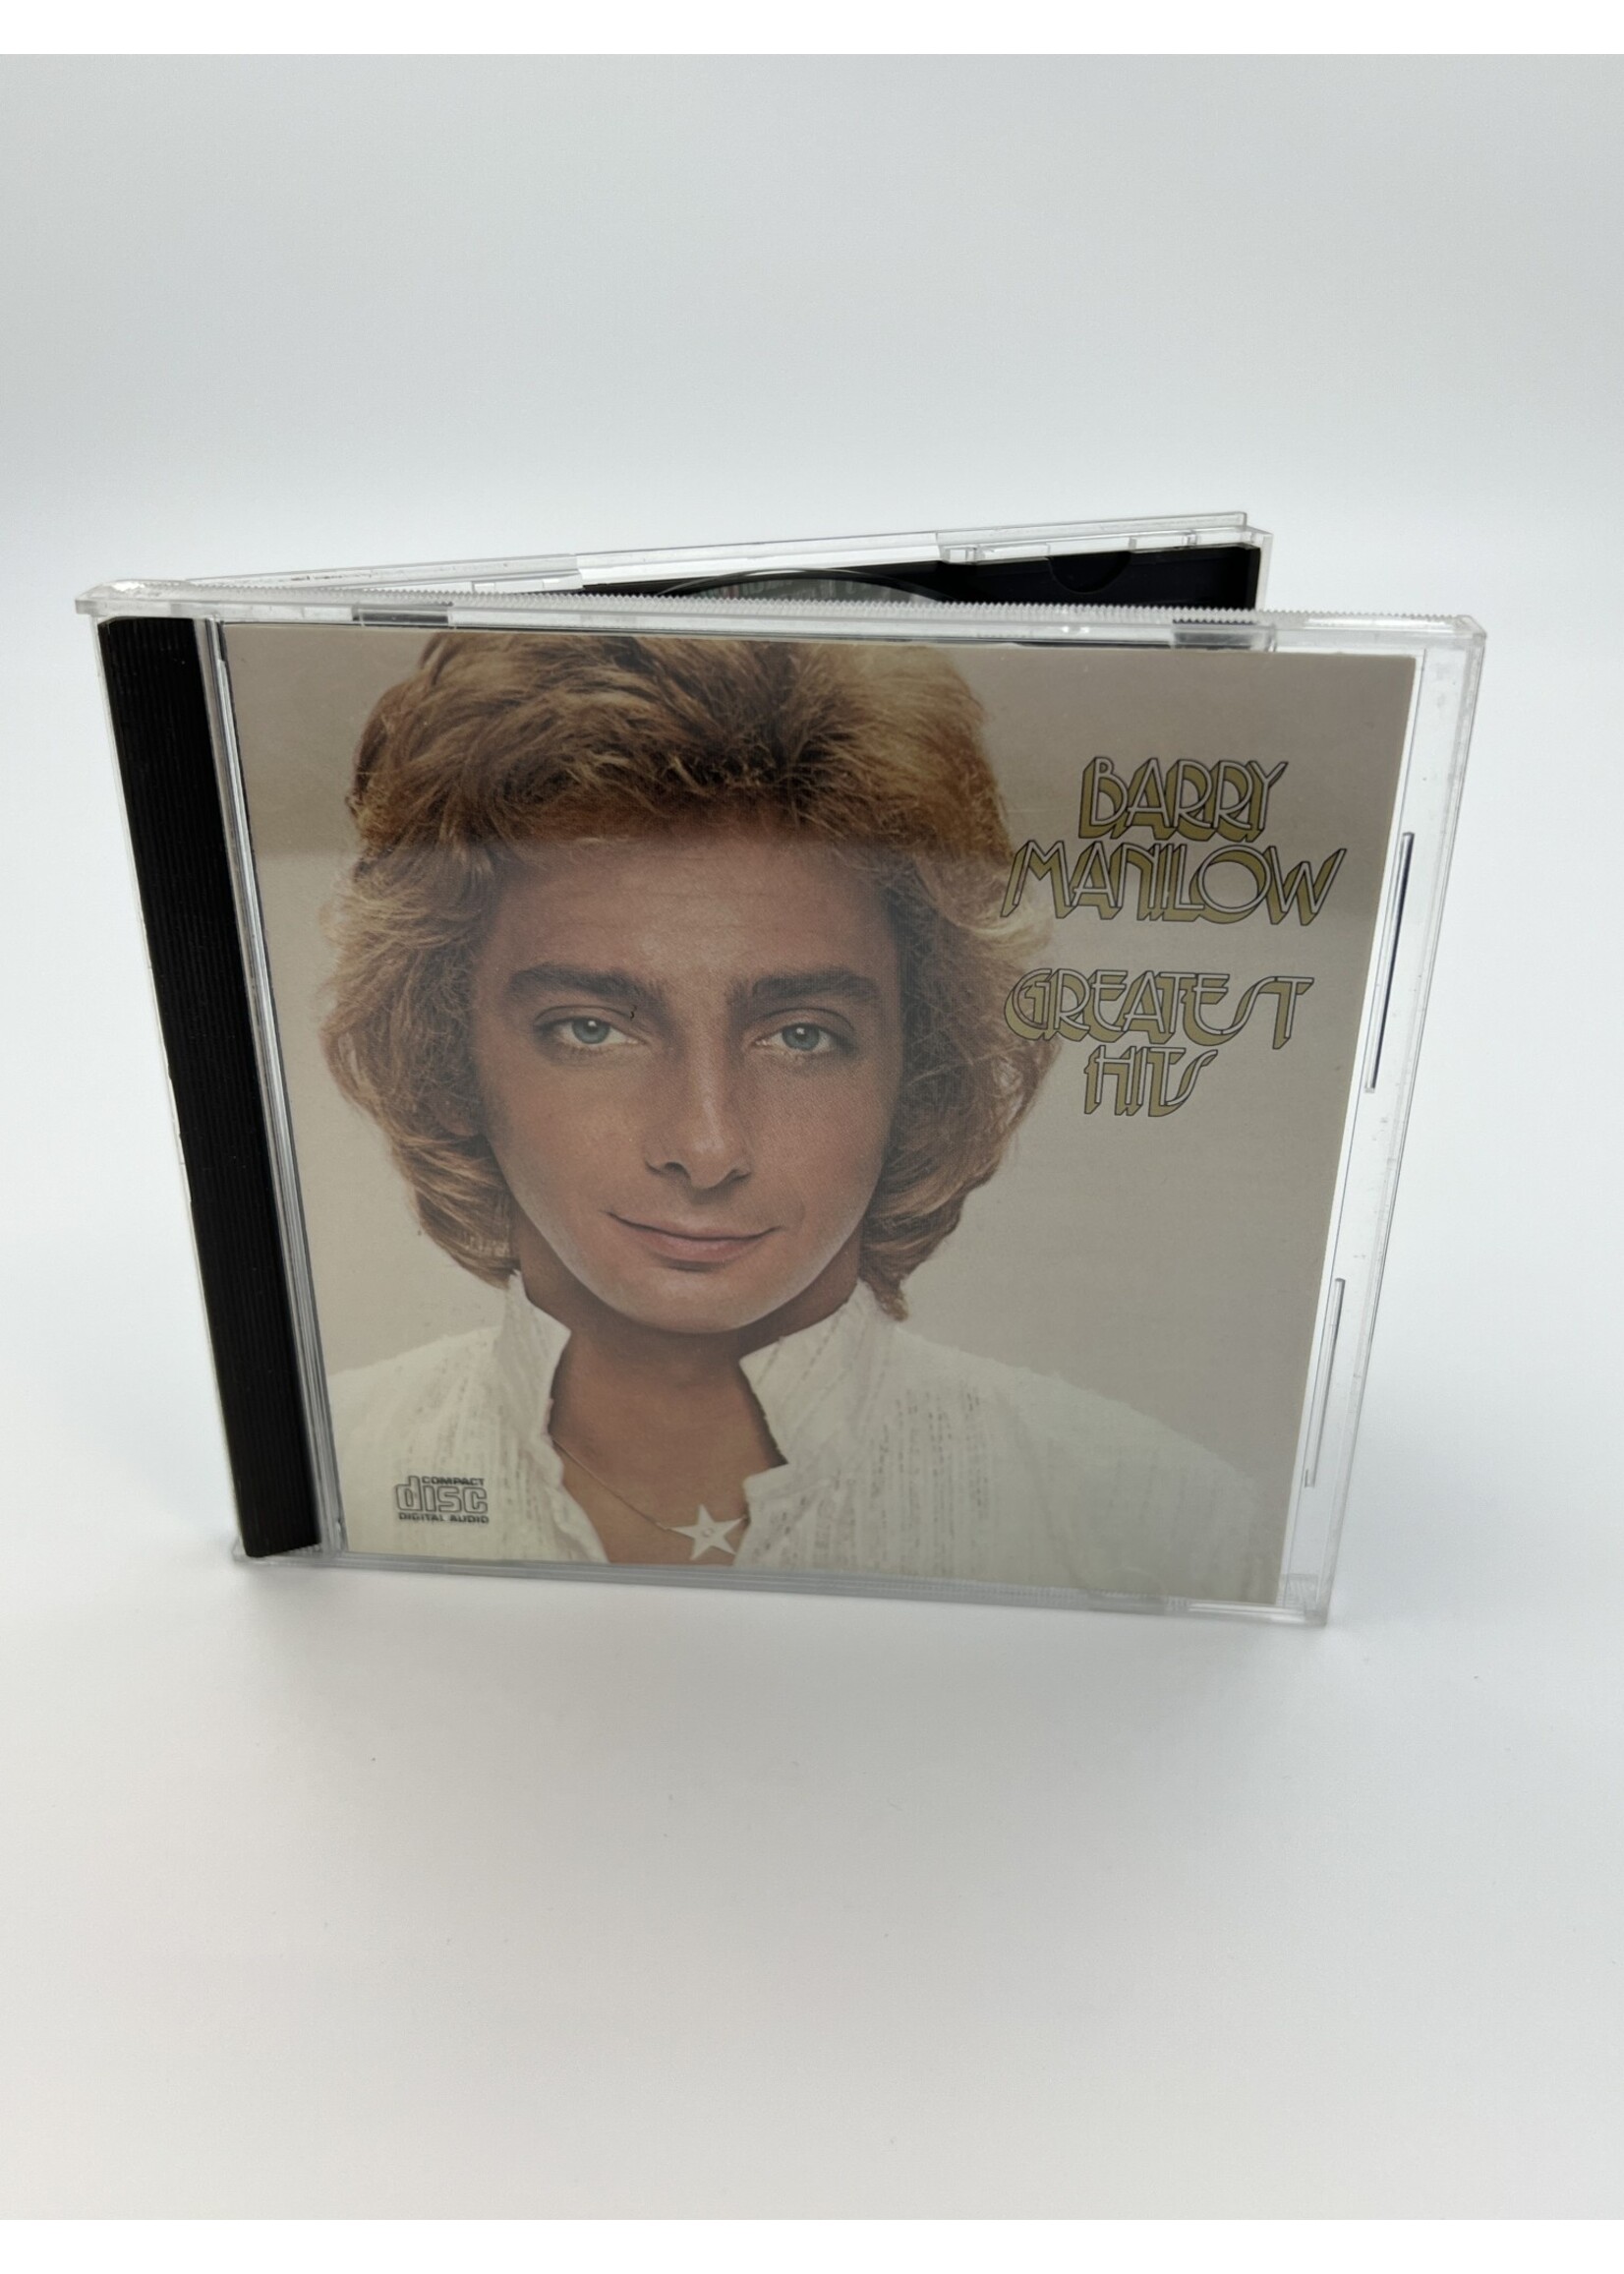 CD Barry Manilow Greatest Hits CD